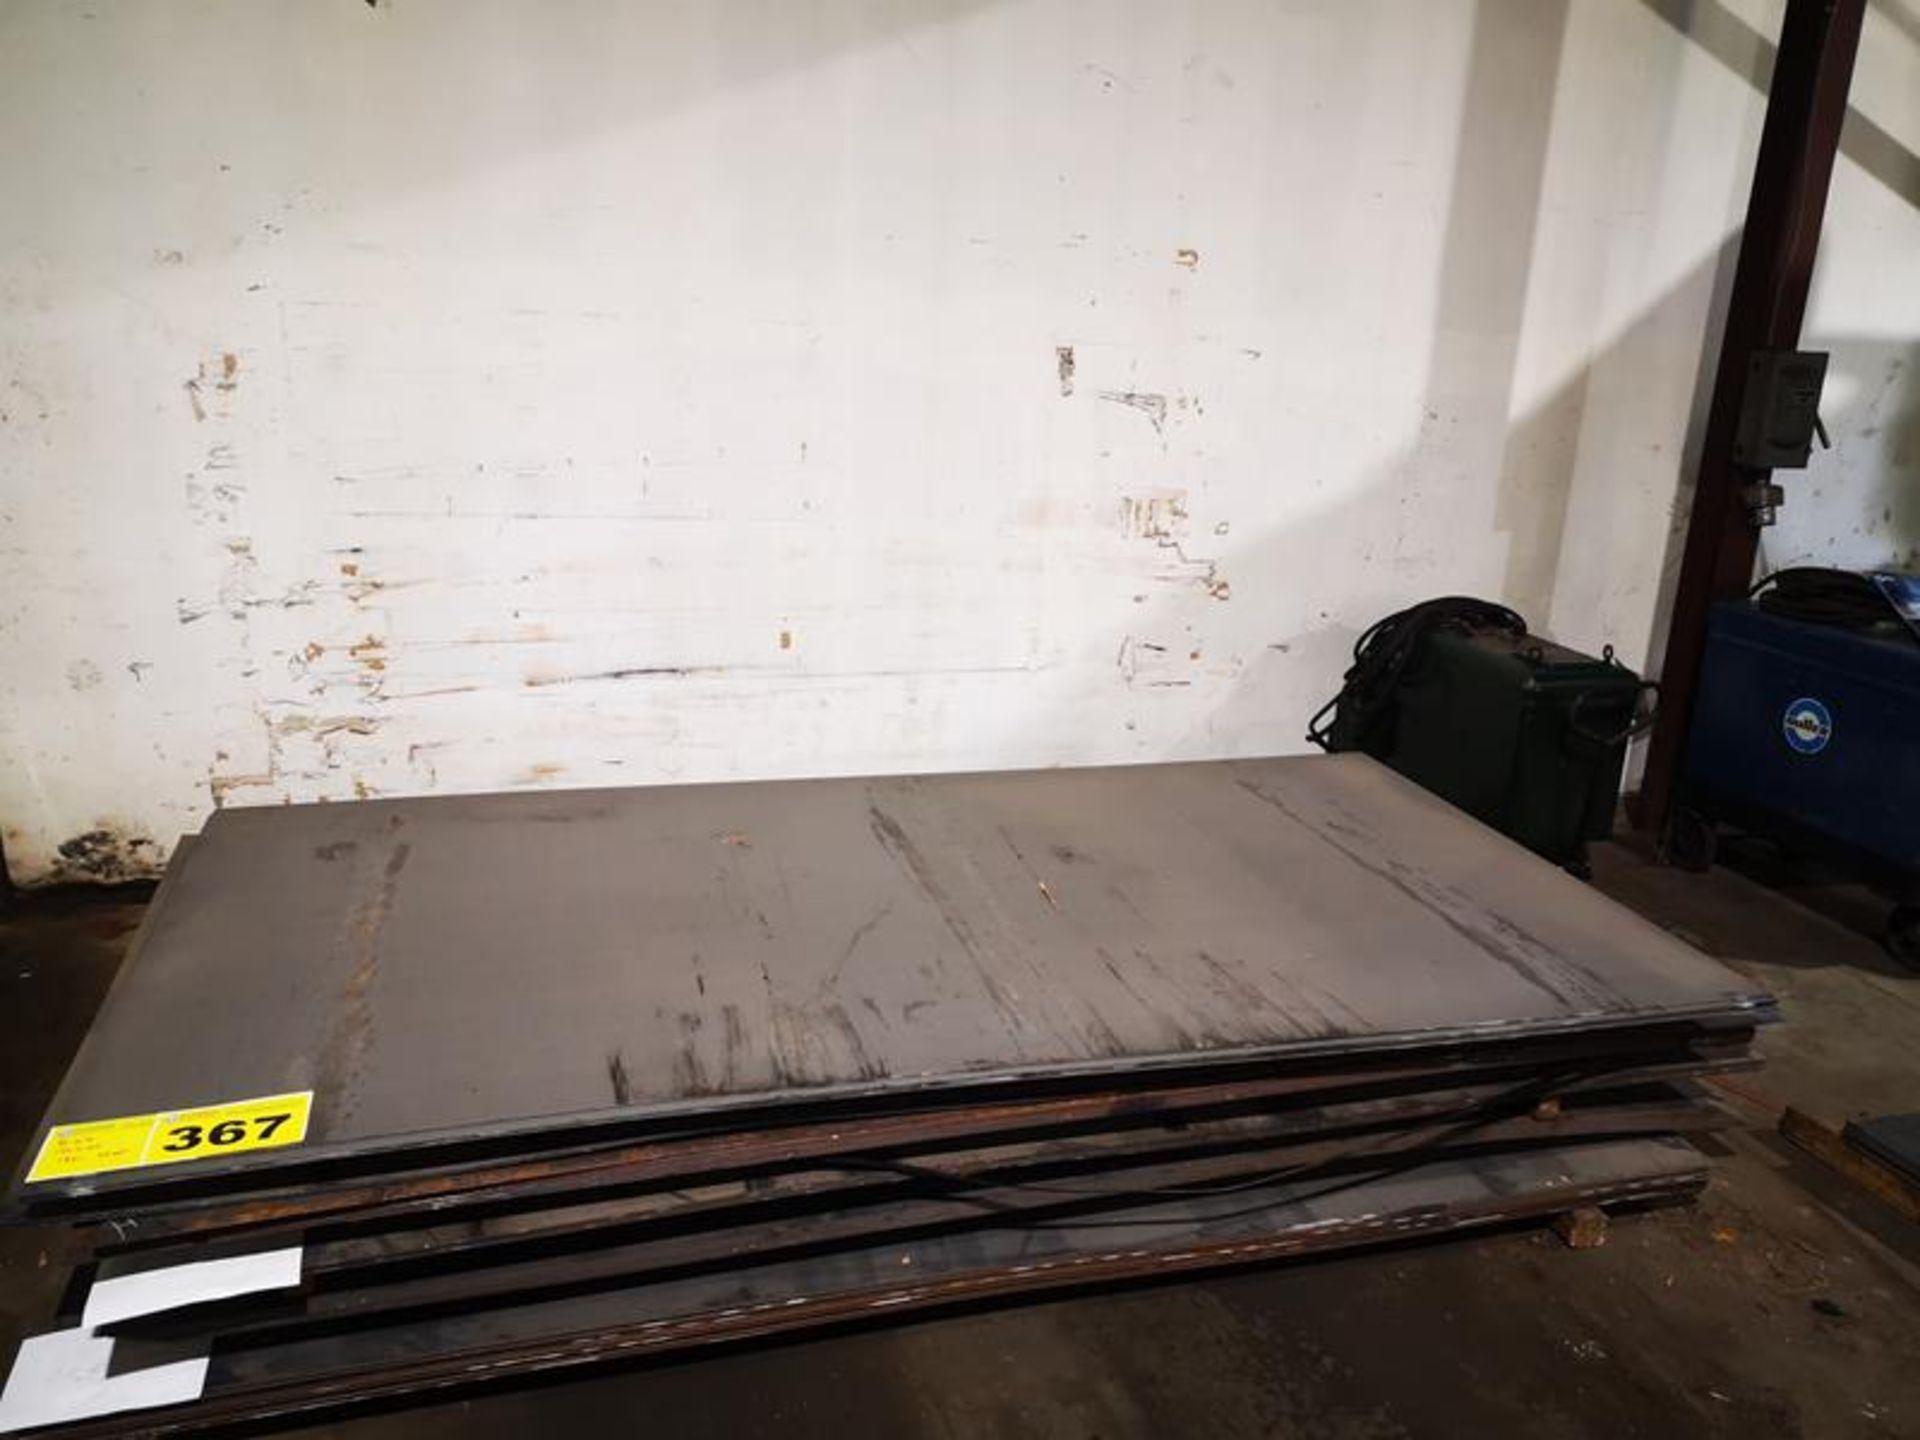 STEEL SHEET, 120" X 60" X 16 GA 18 SHEETS (2250 LBS APPROX. ), WEIGHTS ARE ESTIMATED. BID PRICE IS